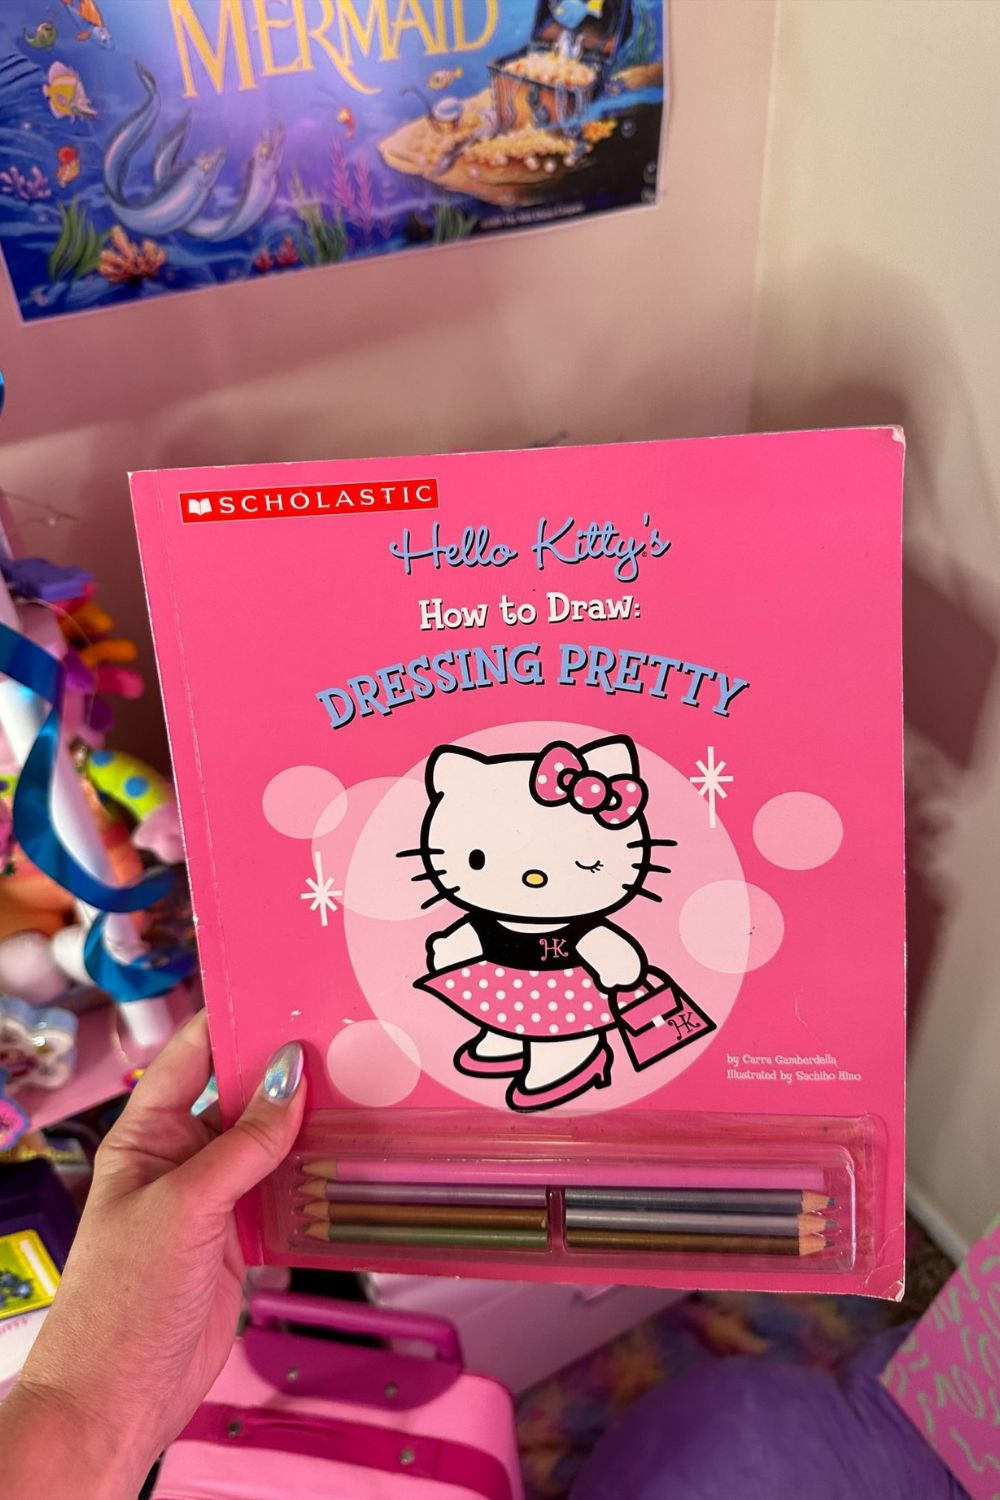 HELLO KITTY'S HOW TO DRAW: DRESSING PRETTY BOOK*